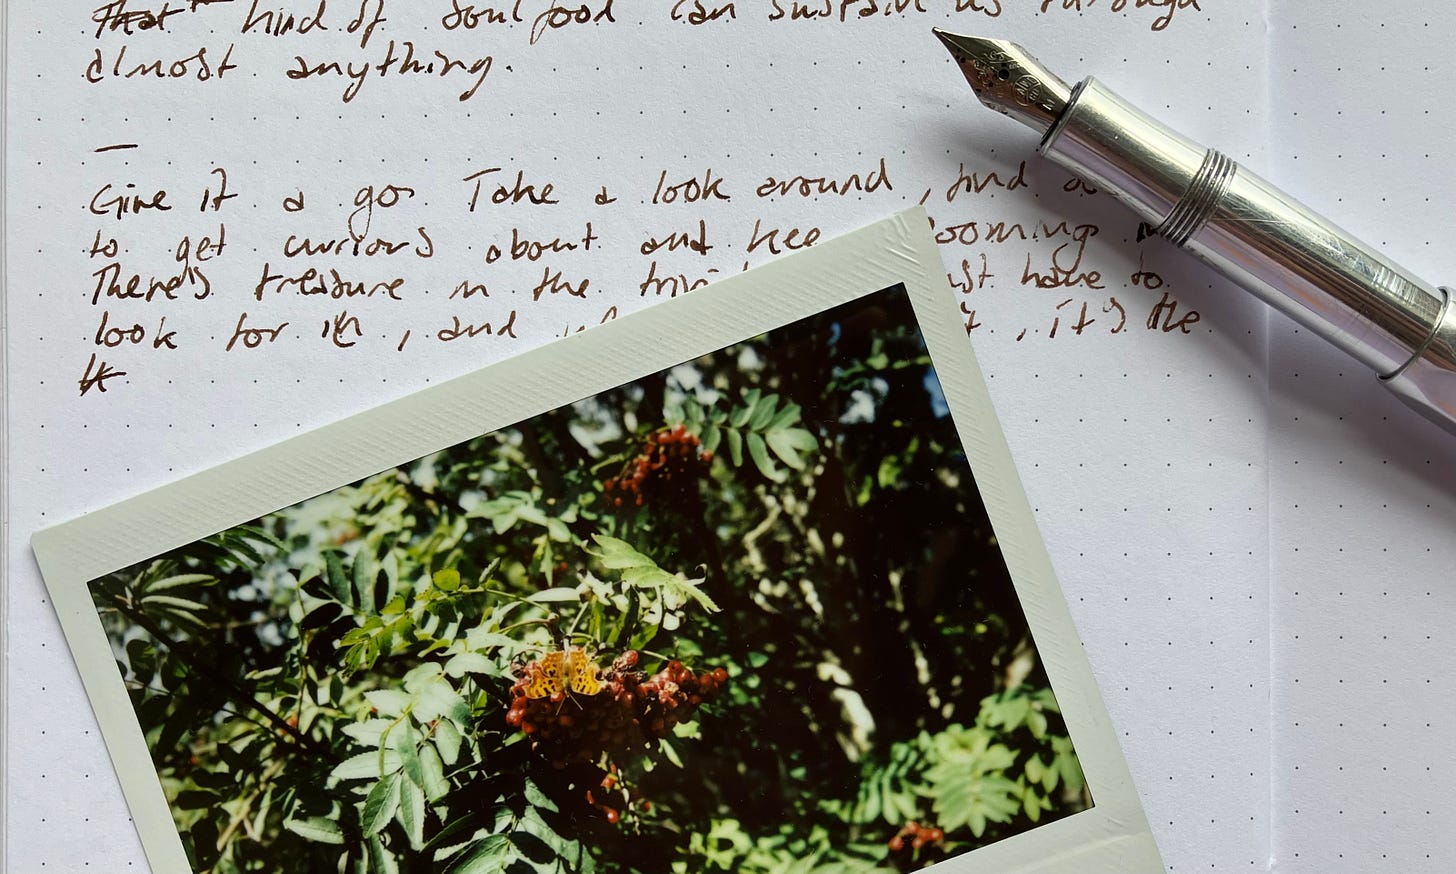 Instal image of butterfly on berries lies on a handwritten journal page